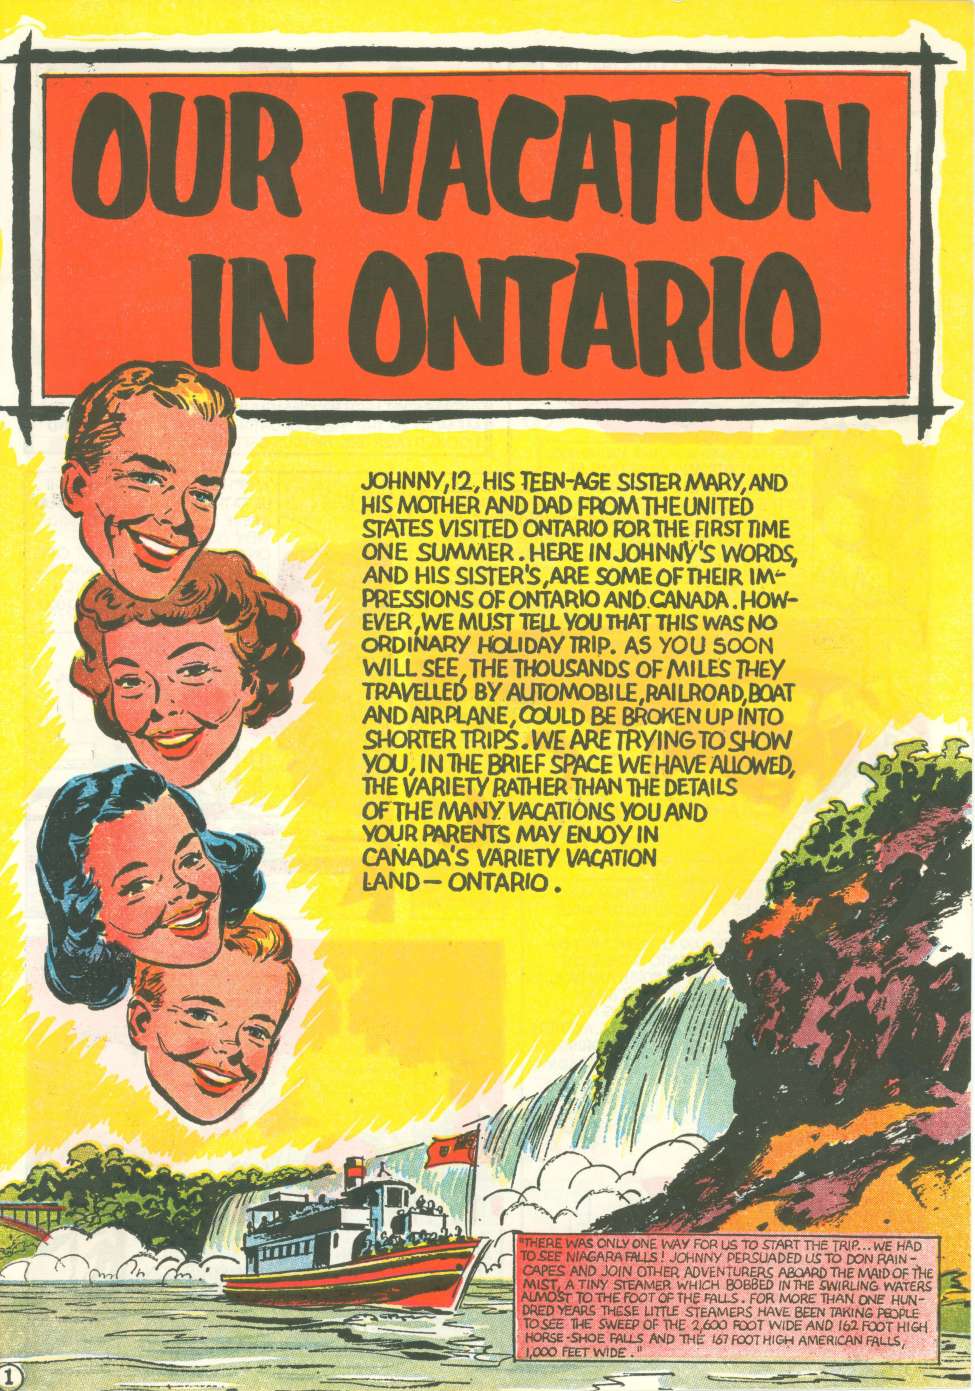 Book Cover For Our Vacation In Ontario - Ontario Ministry of Travel 1954